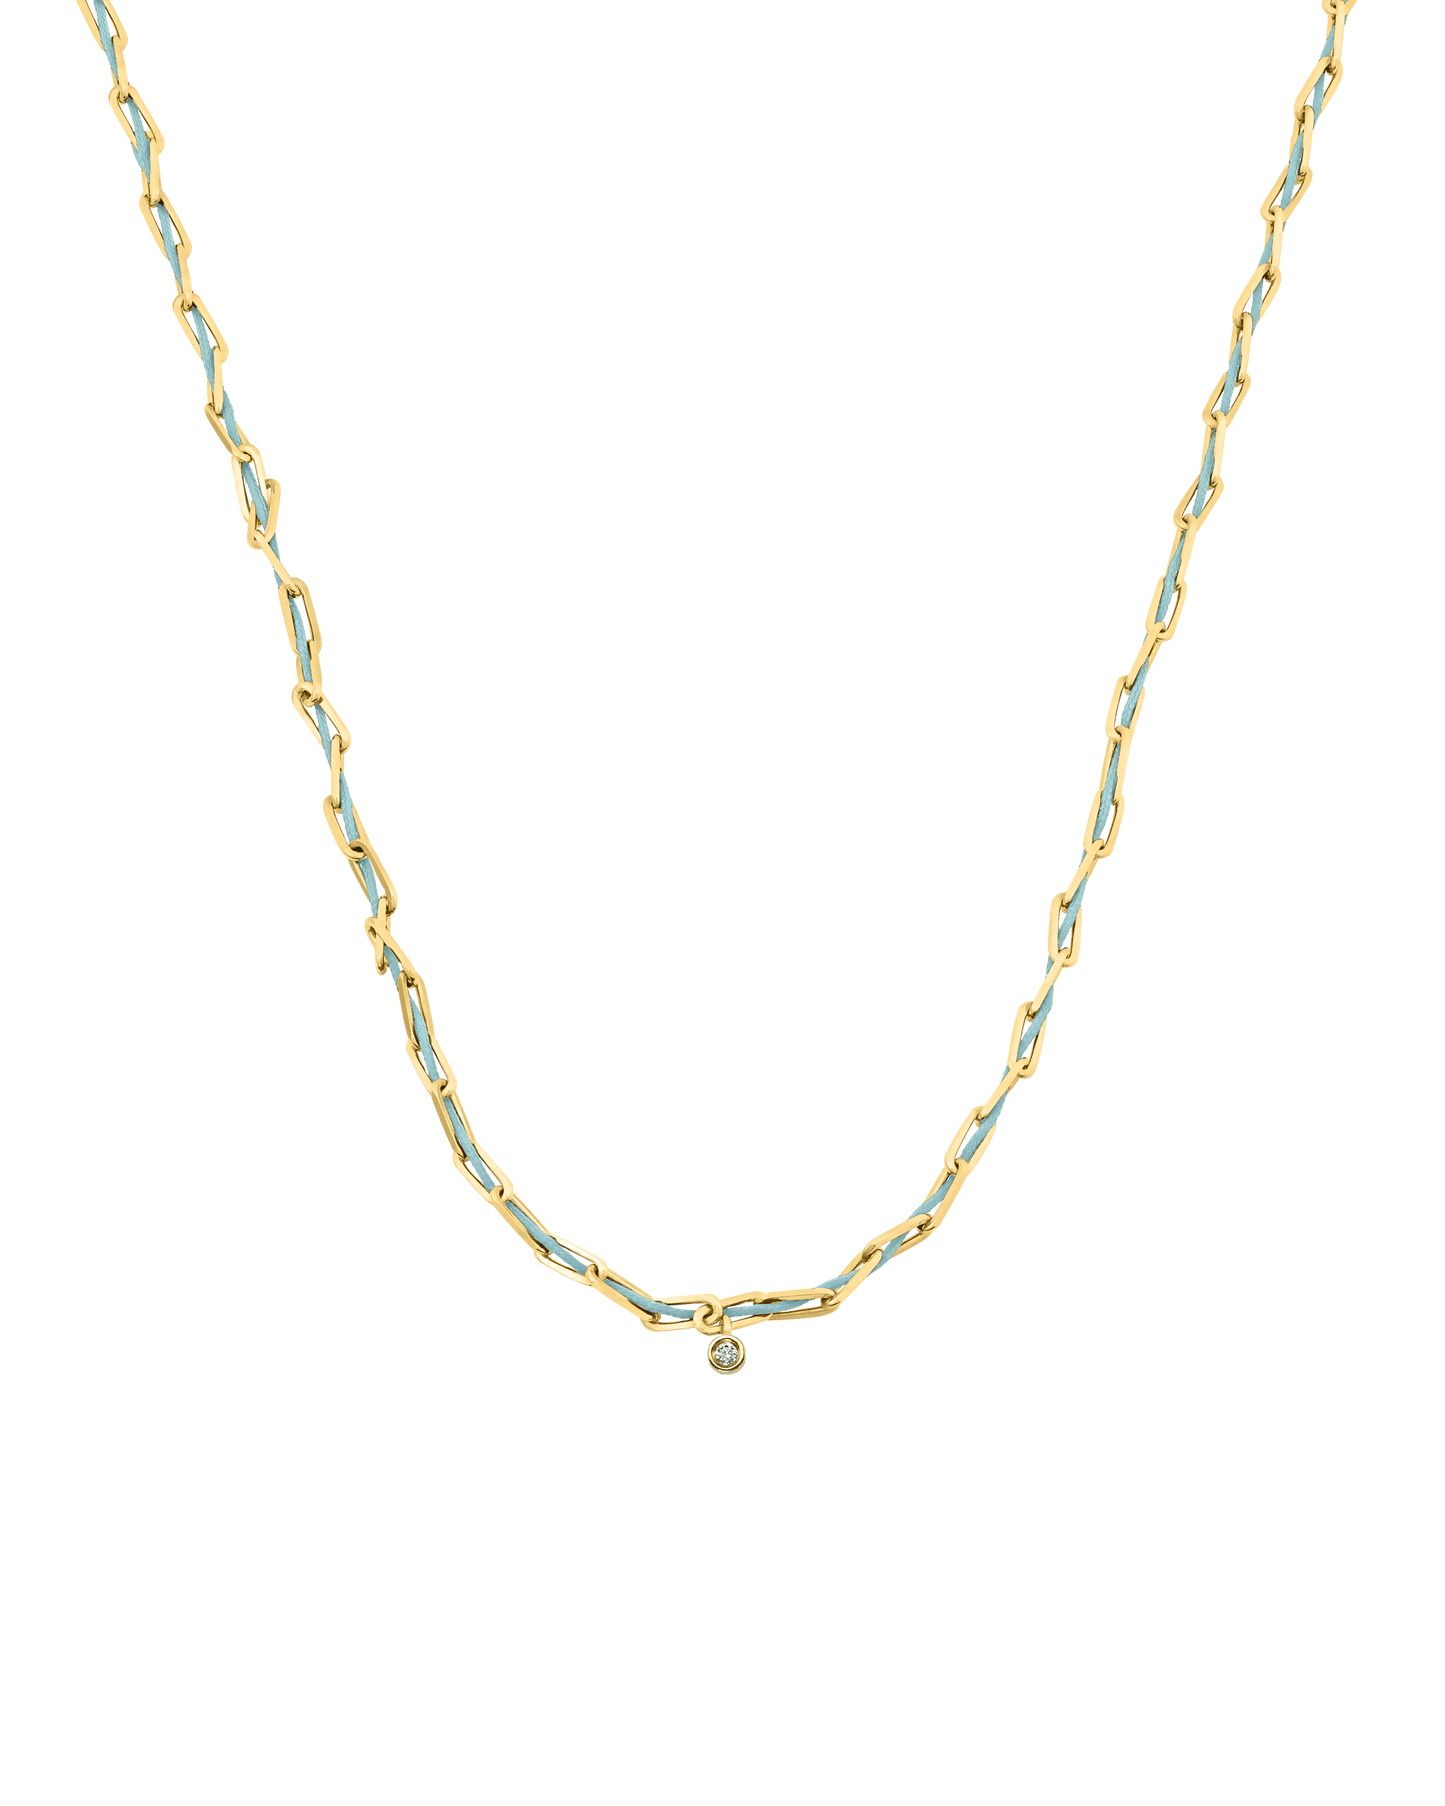 Twine Diamond Necklace - 18K Gold Vermeil Necklaces magal-dev Turquoise Small: 0.03ct 16"